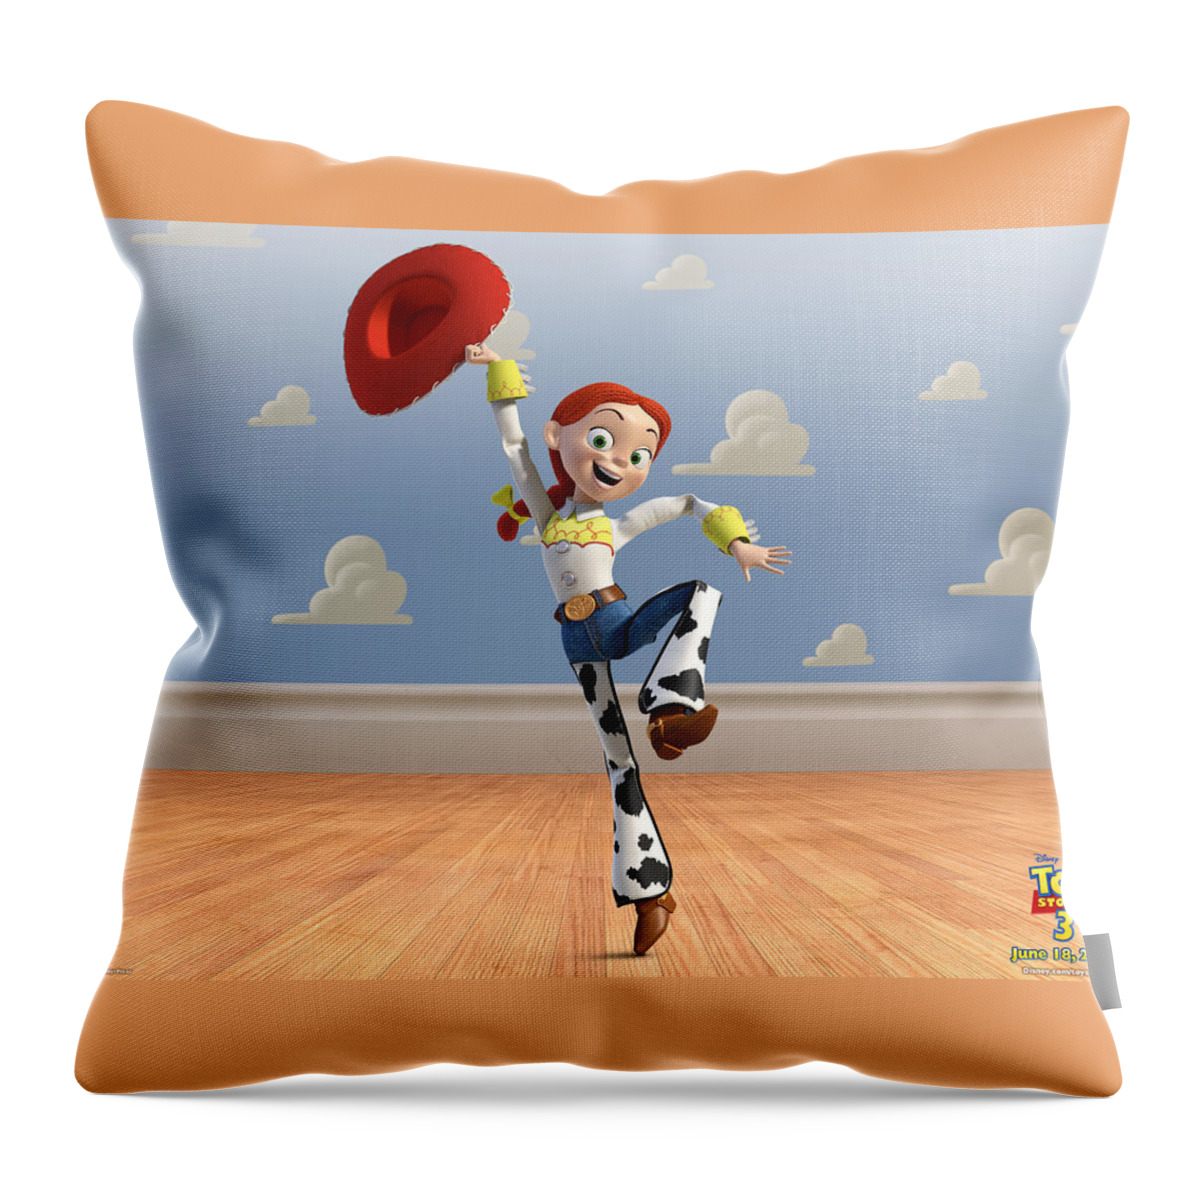 Toy Story 3 Throw Pillow featuring the digital art Toy Story 3 #1 by Super Lovely